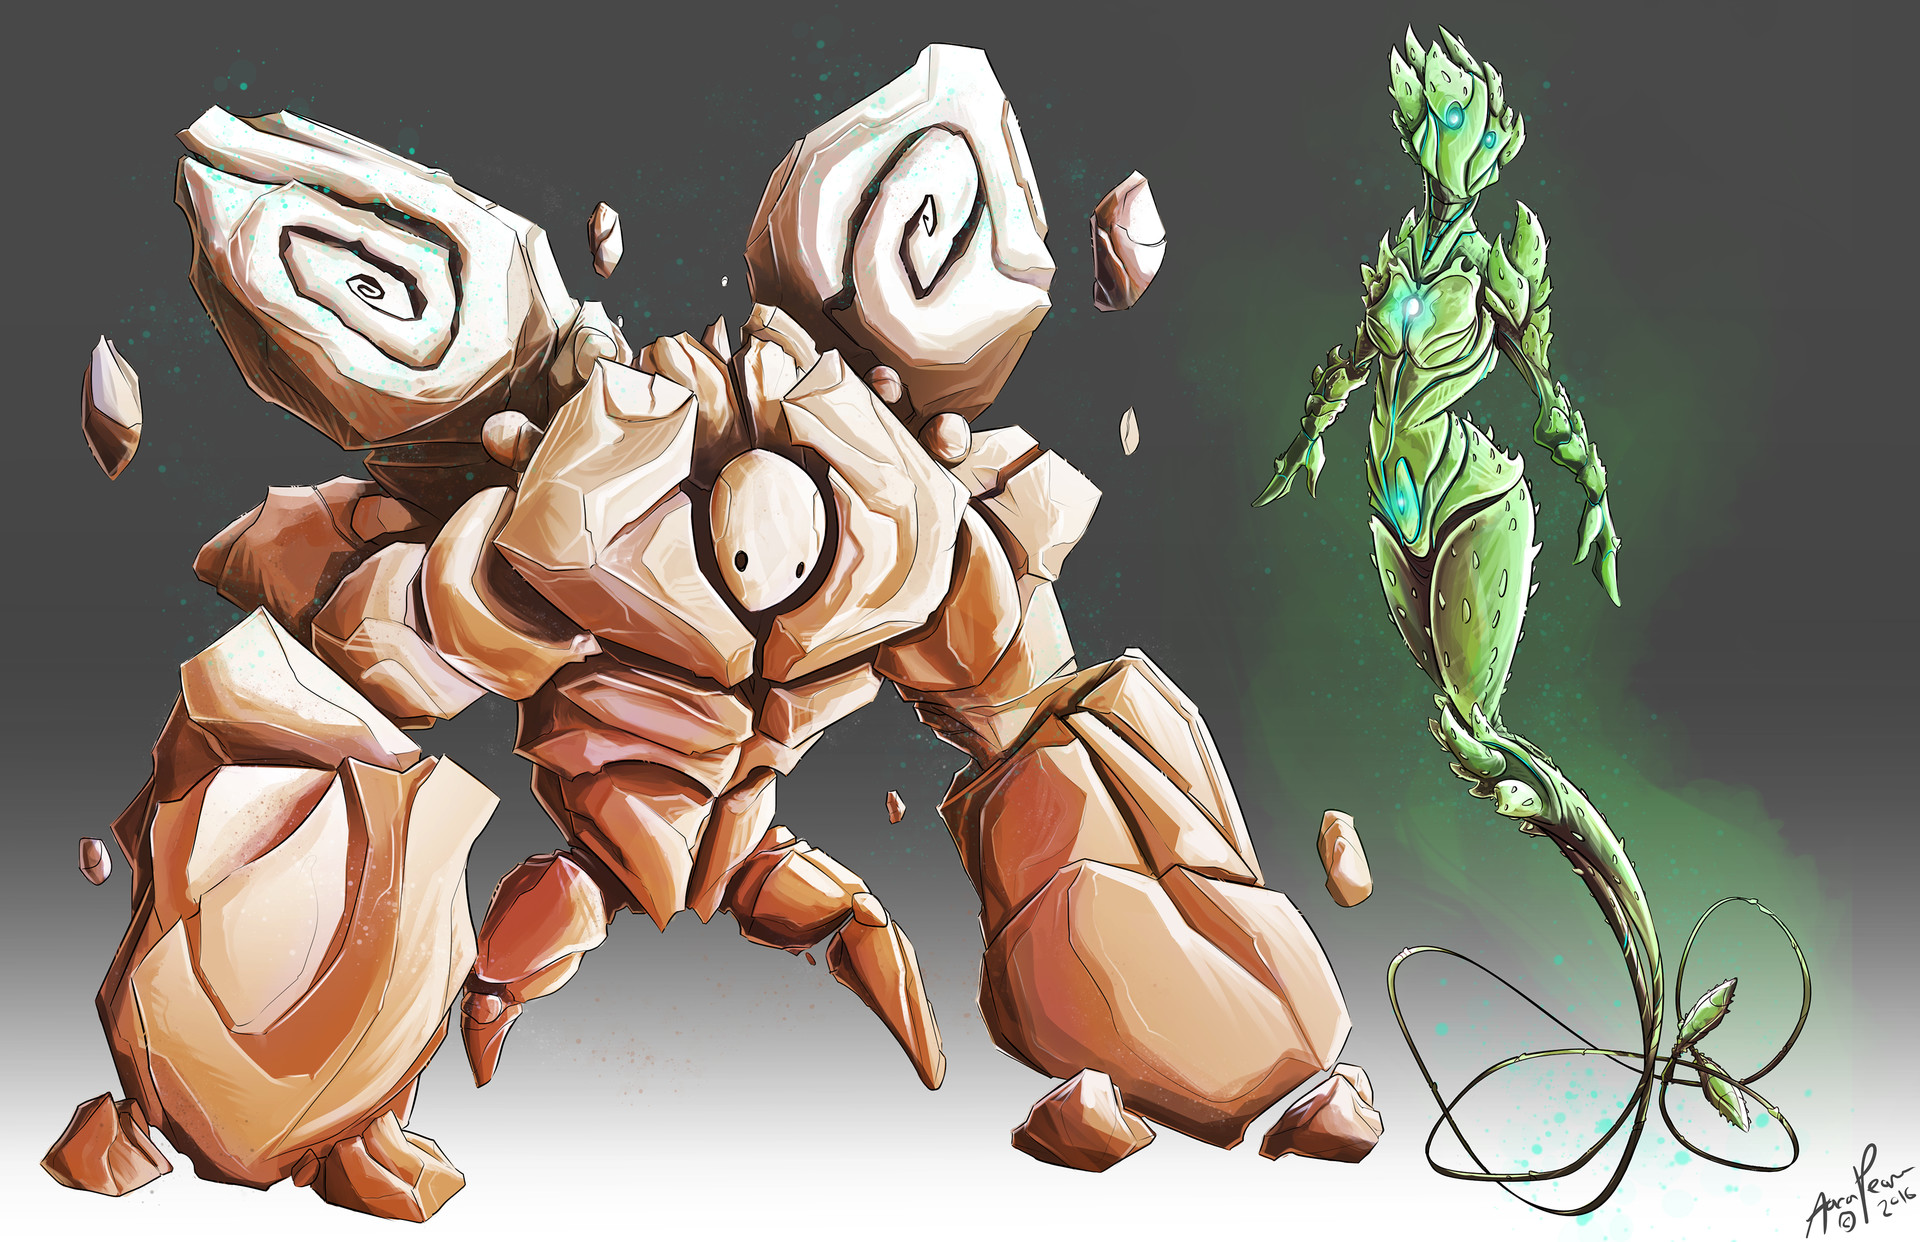 A Well Stone Golem on the left and an Aloe plant Spirit on the right. 